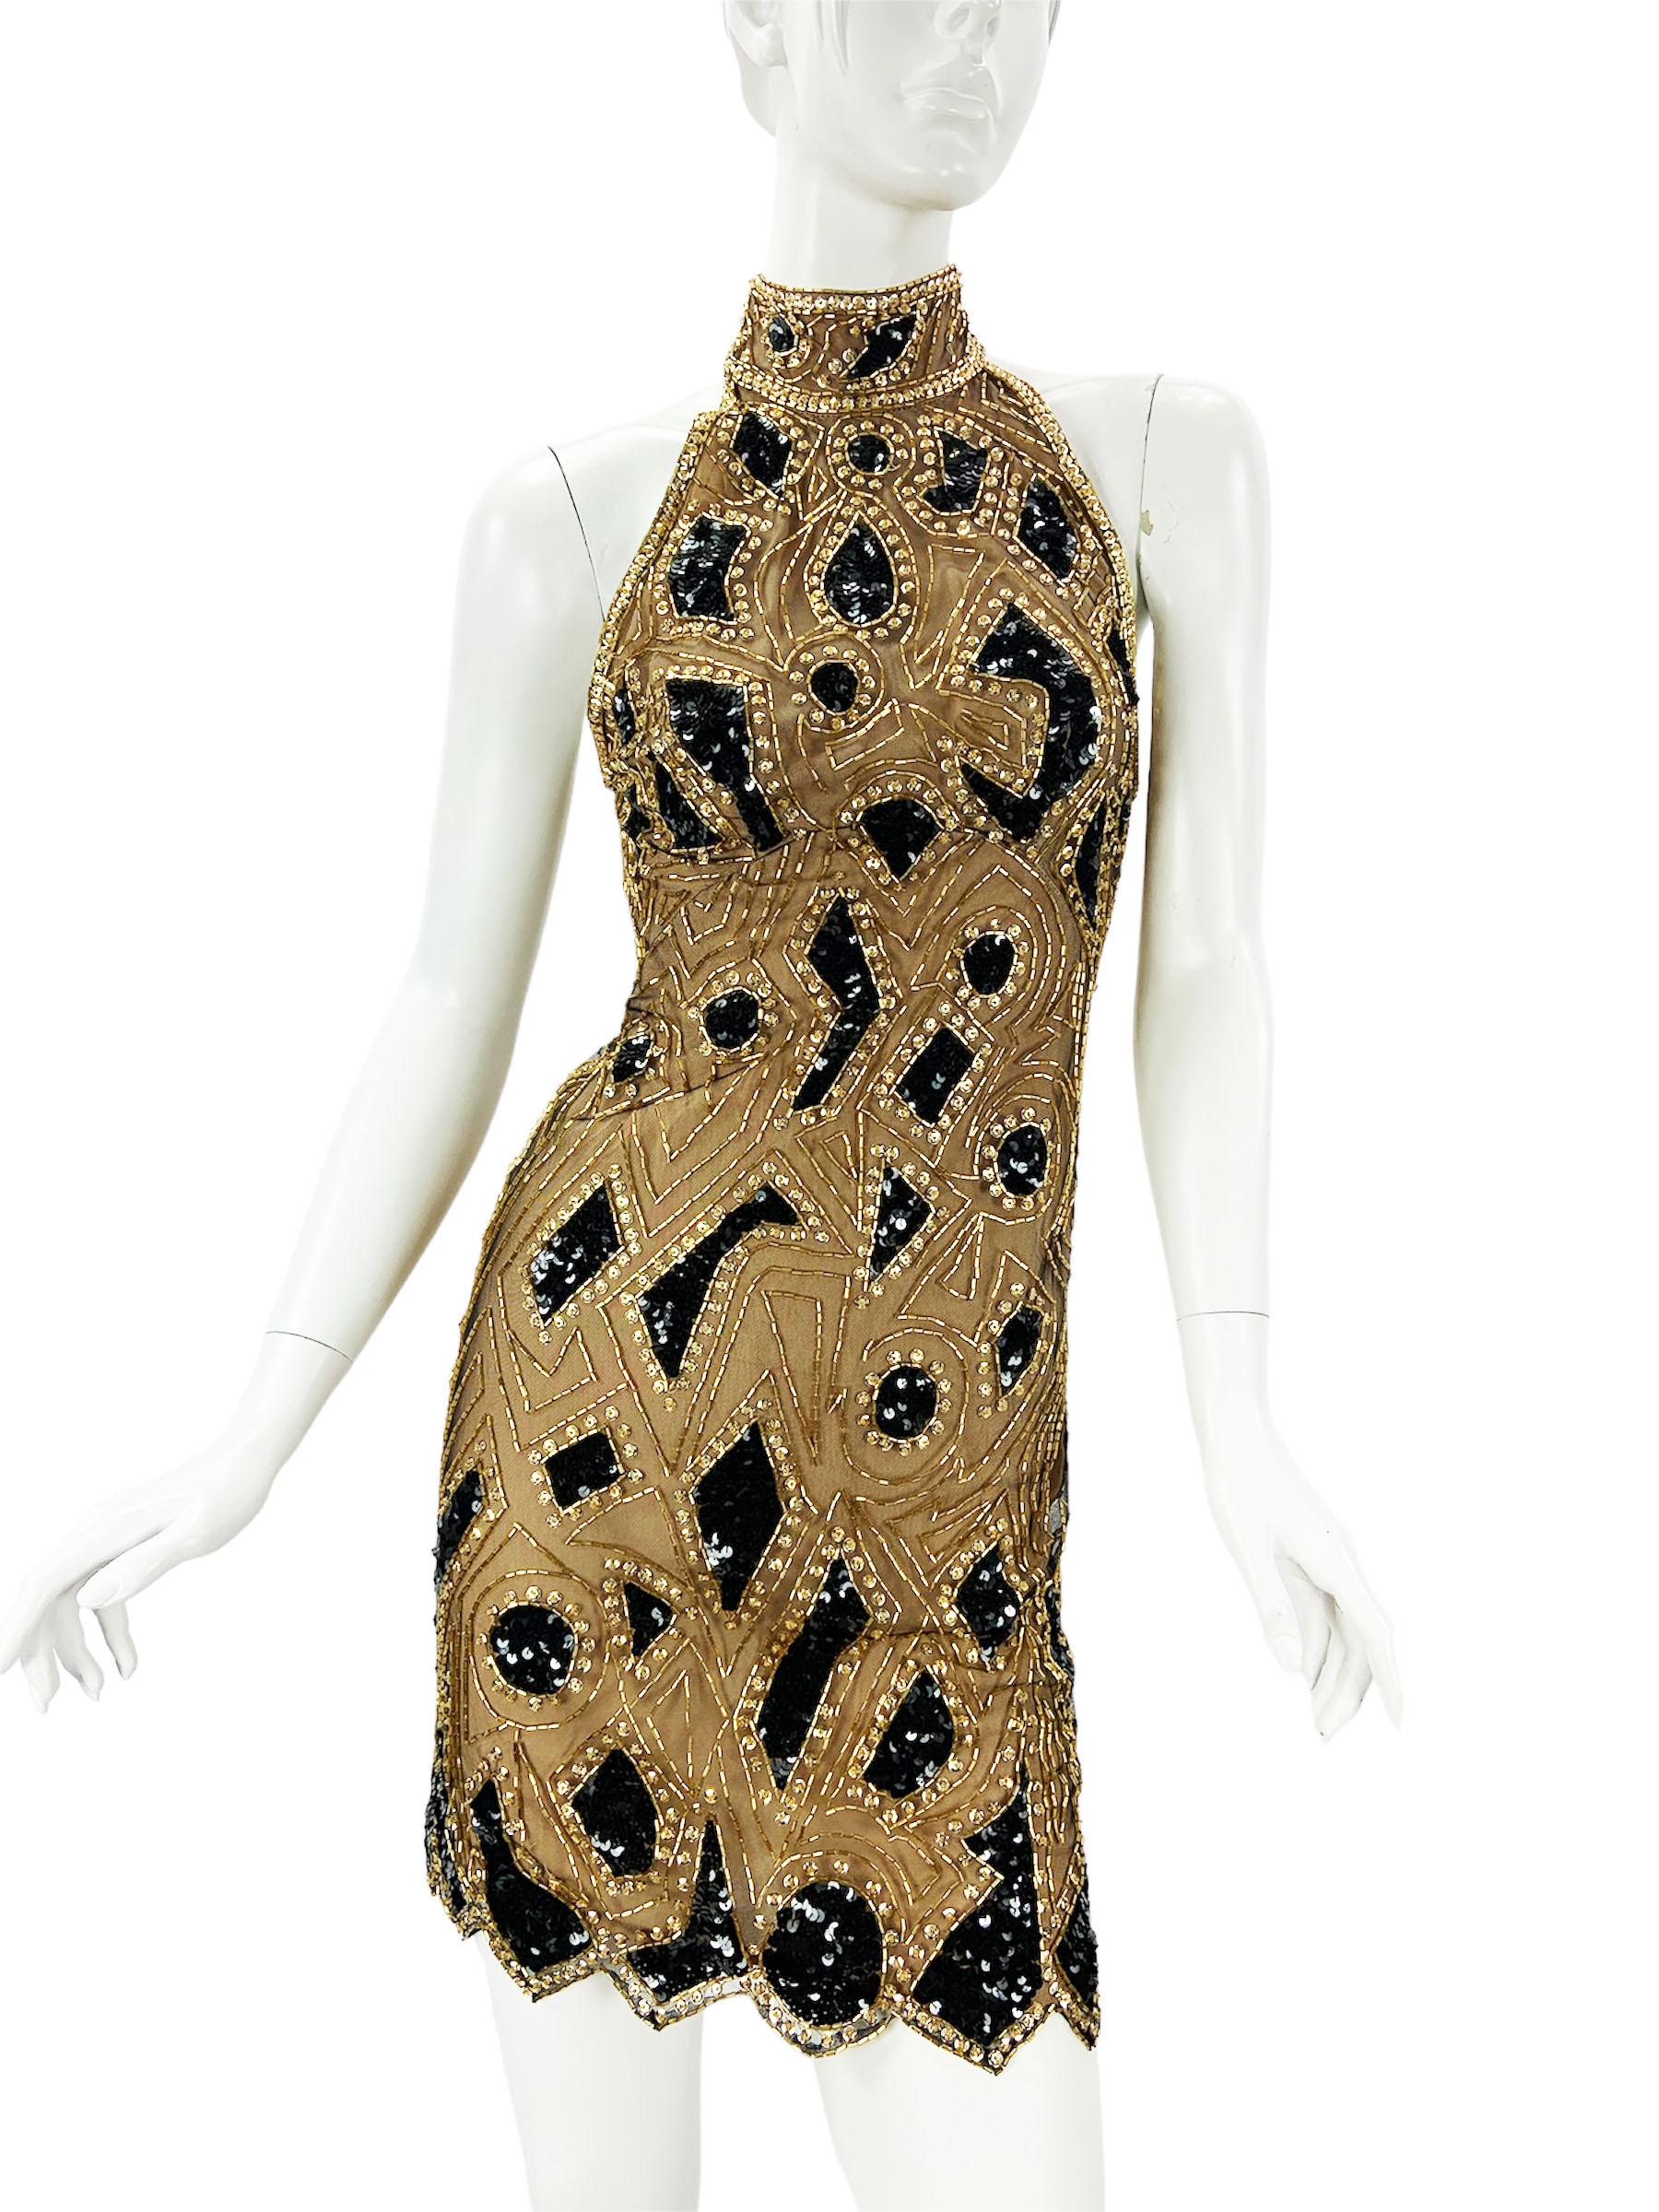 Vintage 80's Bob Mackie Gold Black Embellished Mini Dress
If you’re a fan of Fran, she wore this same dress in 1991 on the show “Princesses”.
US size - 4
Exquisitely Beaded in Gold and Black  Sequins and Beads over the Black Tulle,  
Nude Color